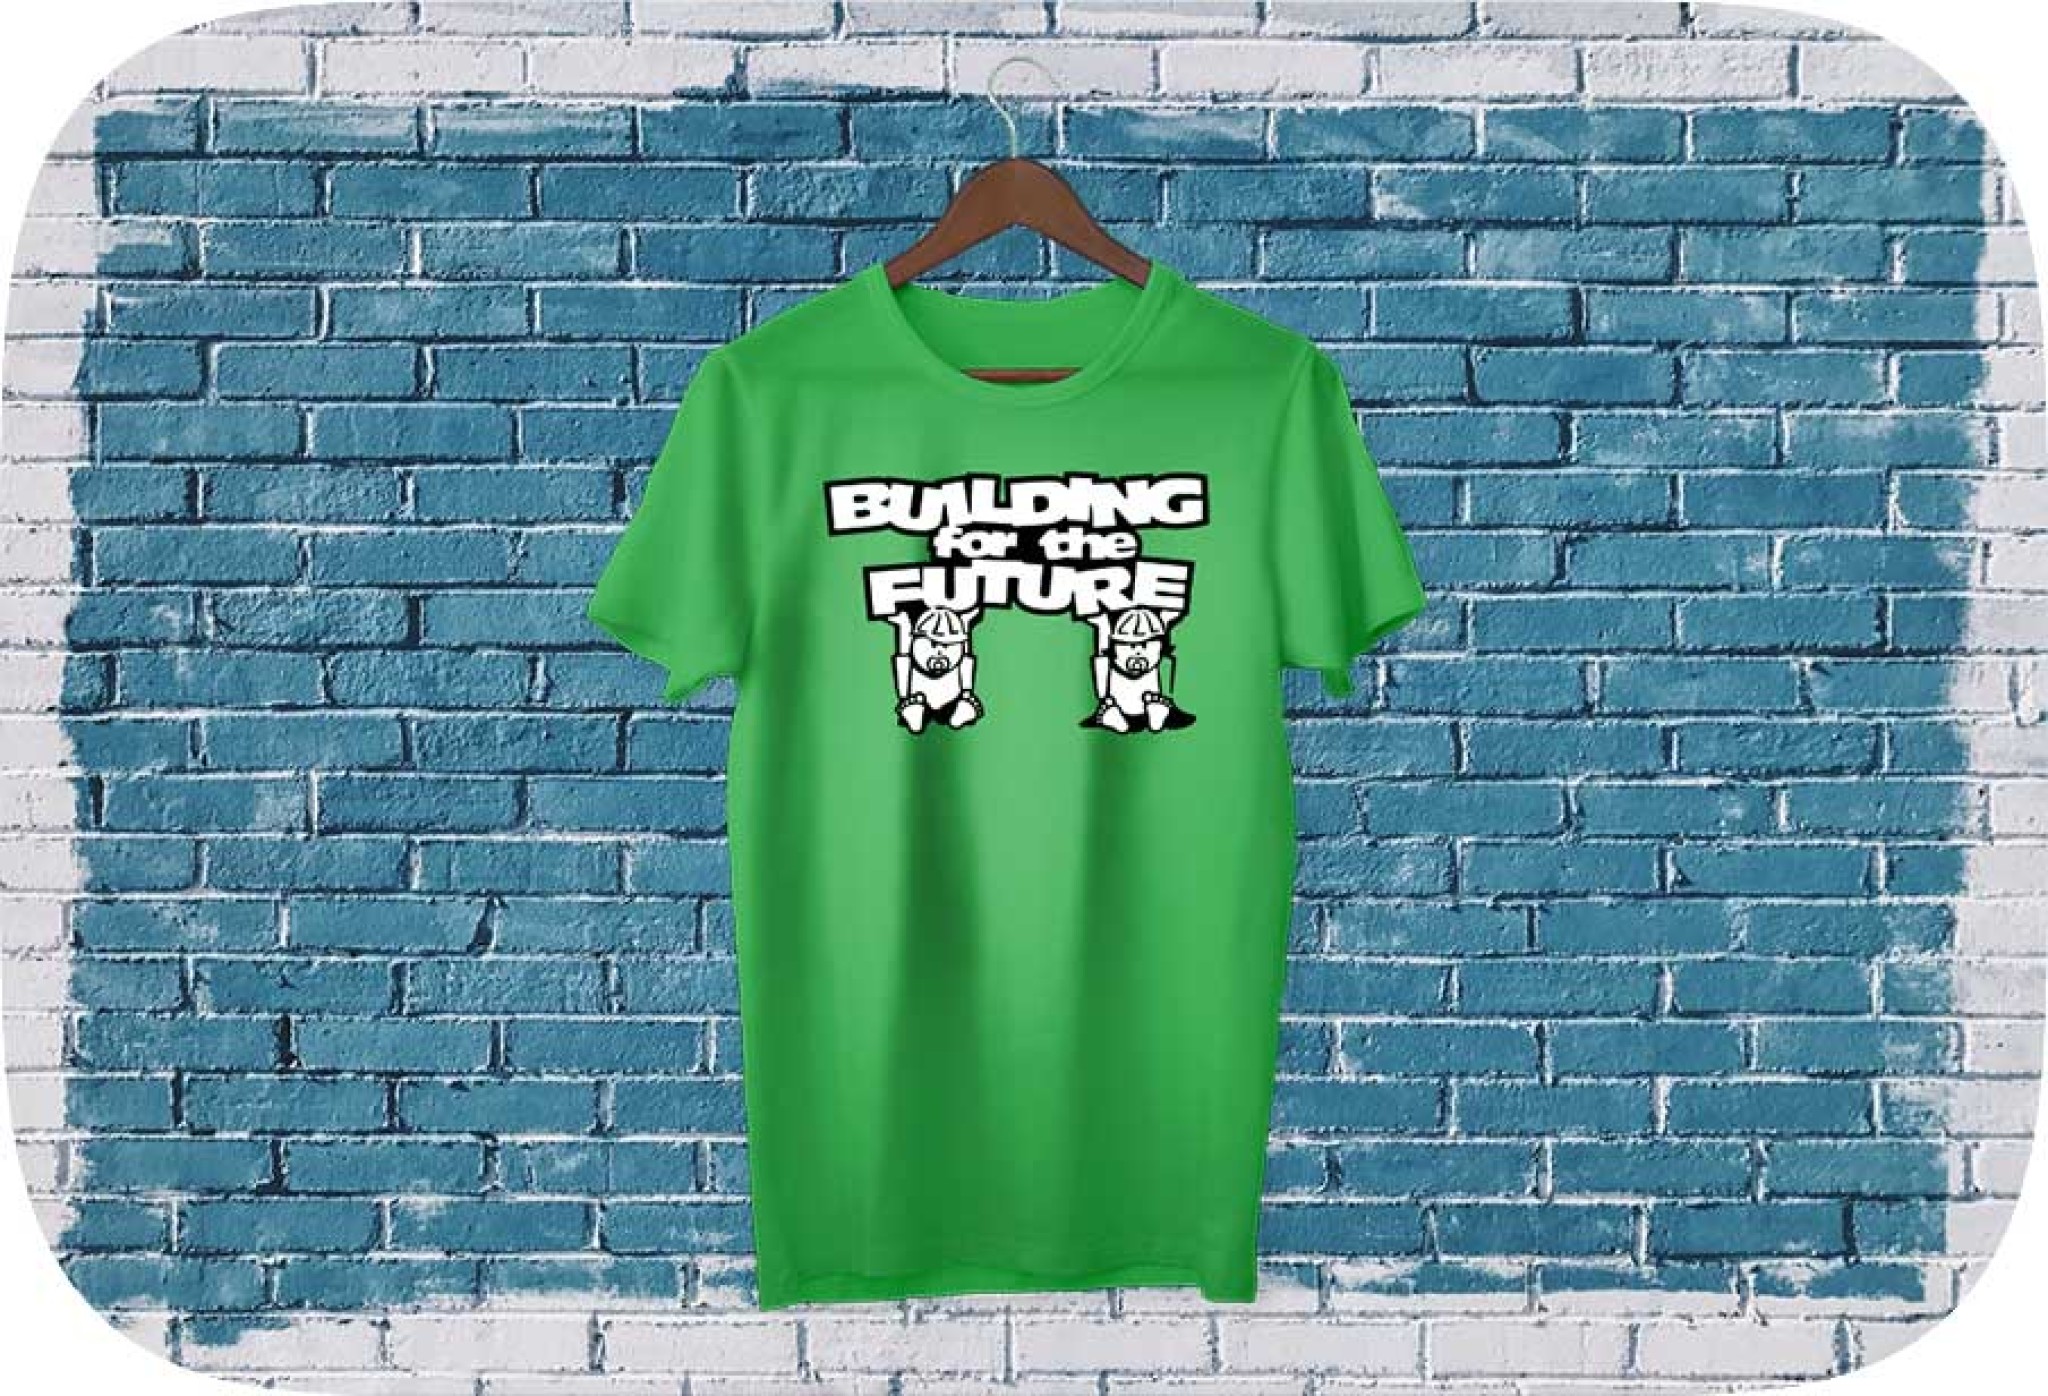 Personalised-tshirt-funny-building-for-the-future-create-your-own.jpg